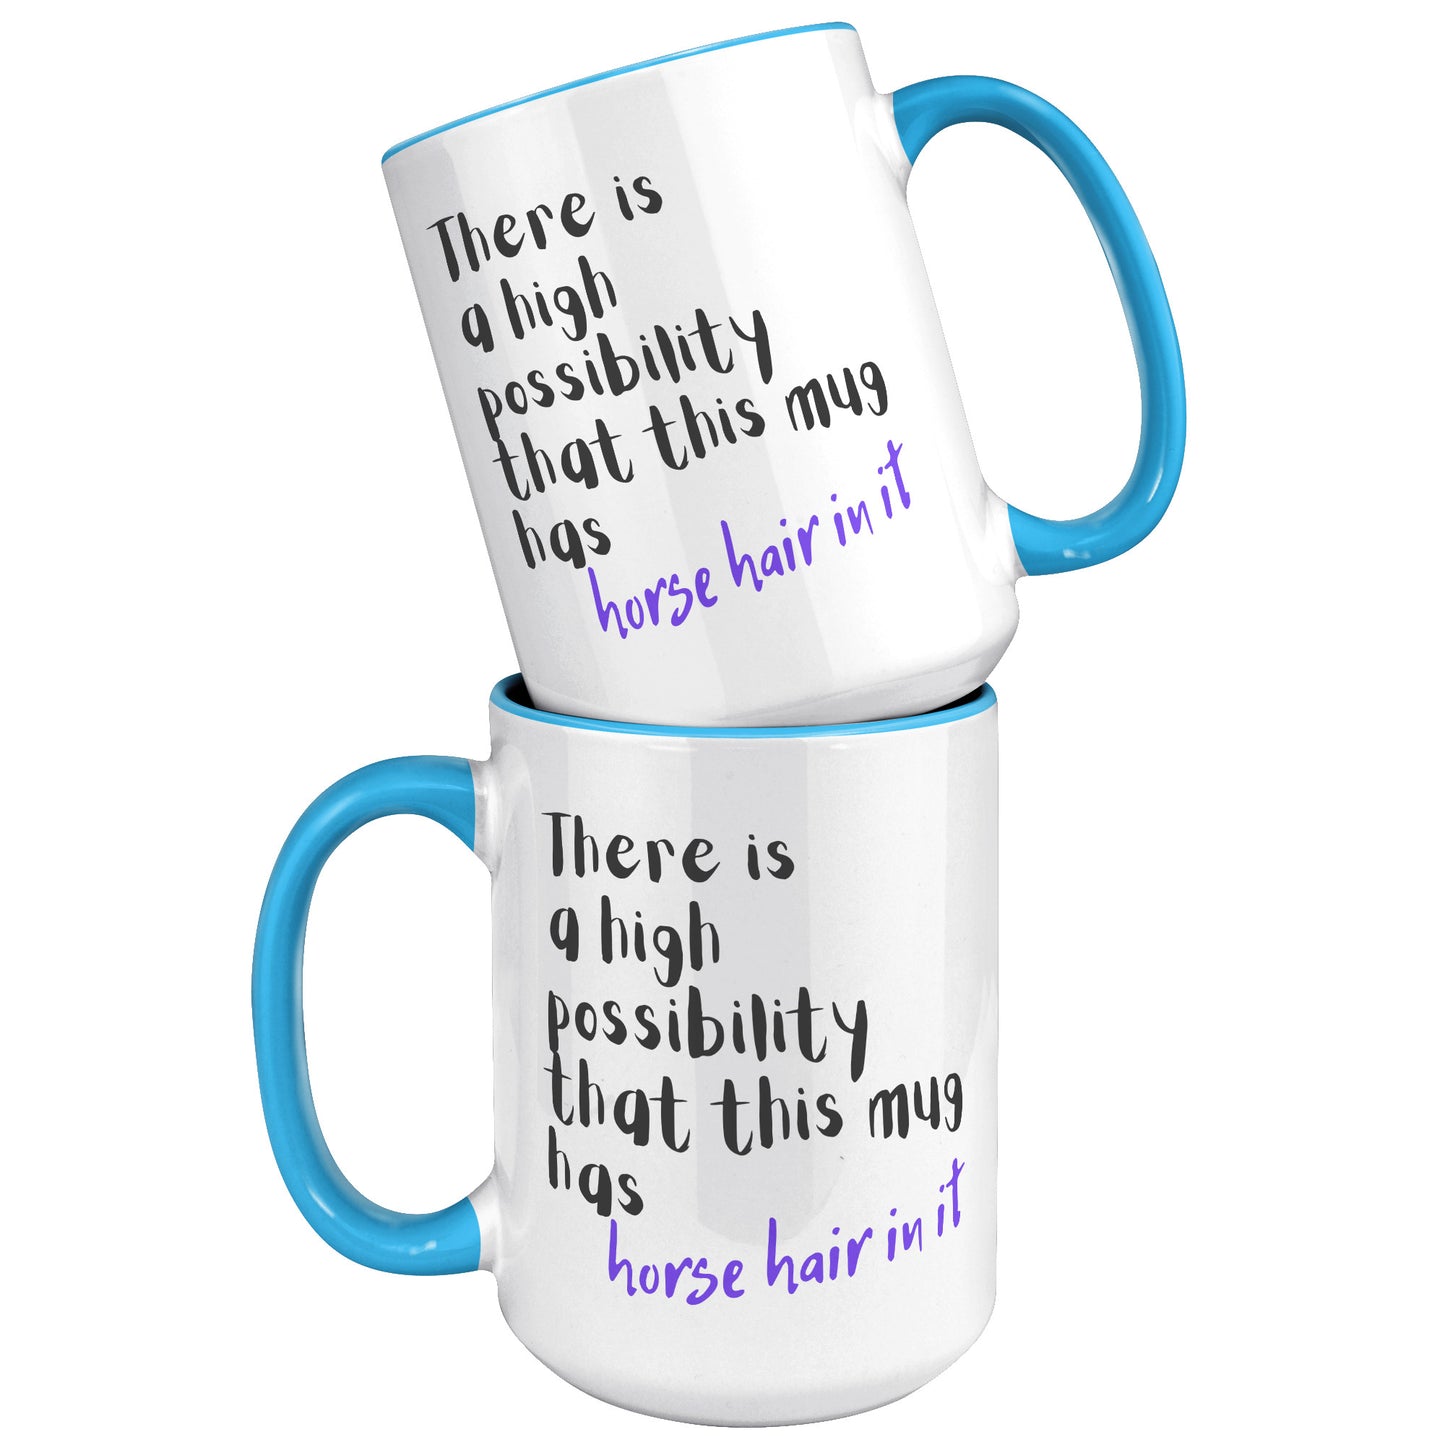 Comical Mug for the Horse Lover that also Loves Coffee as Well